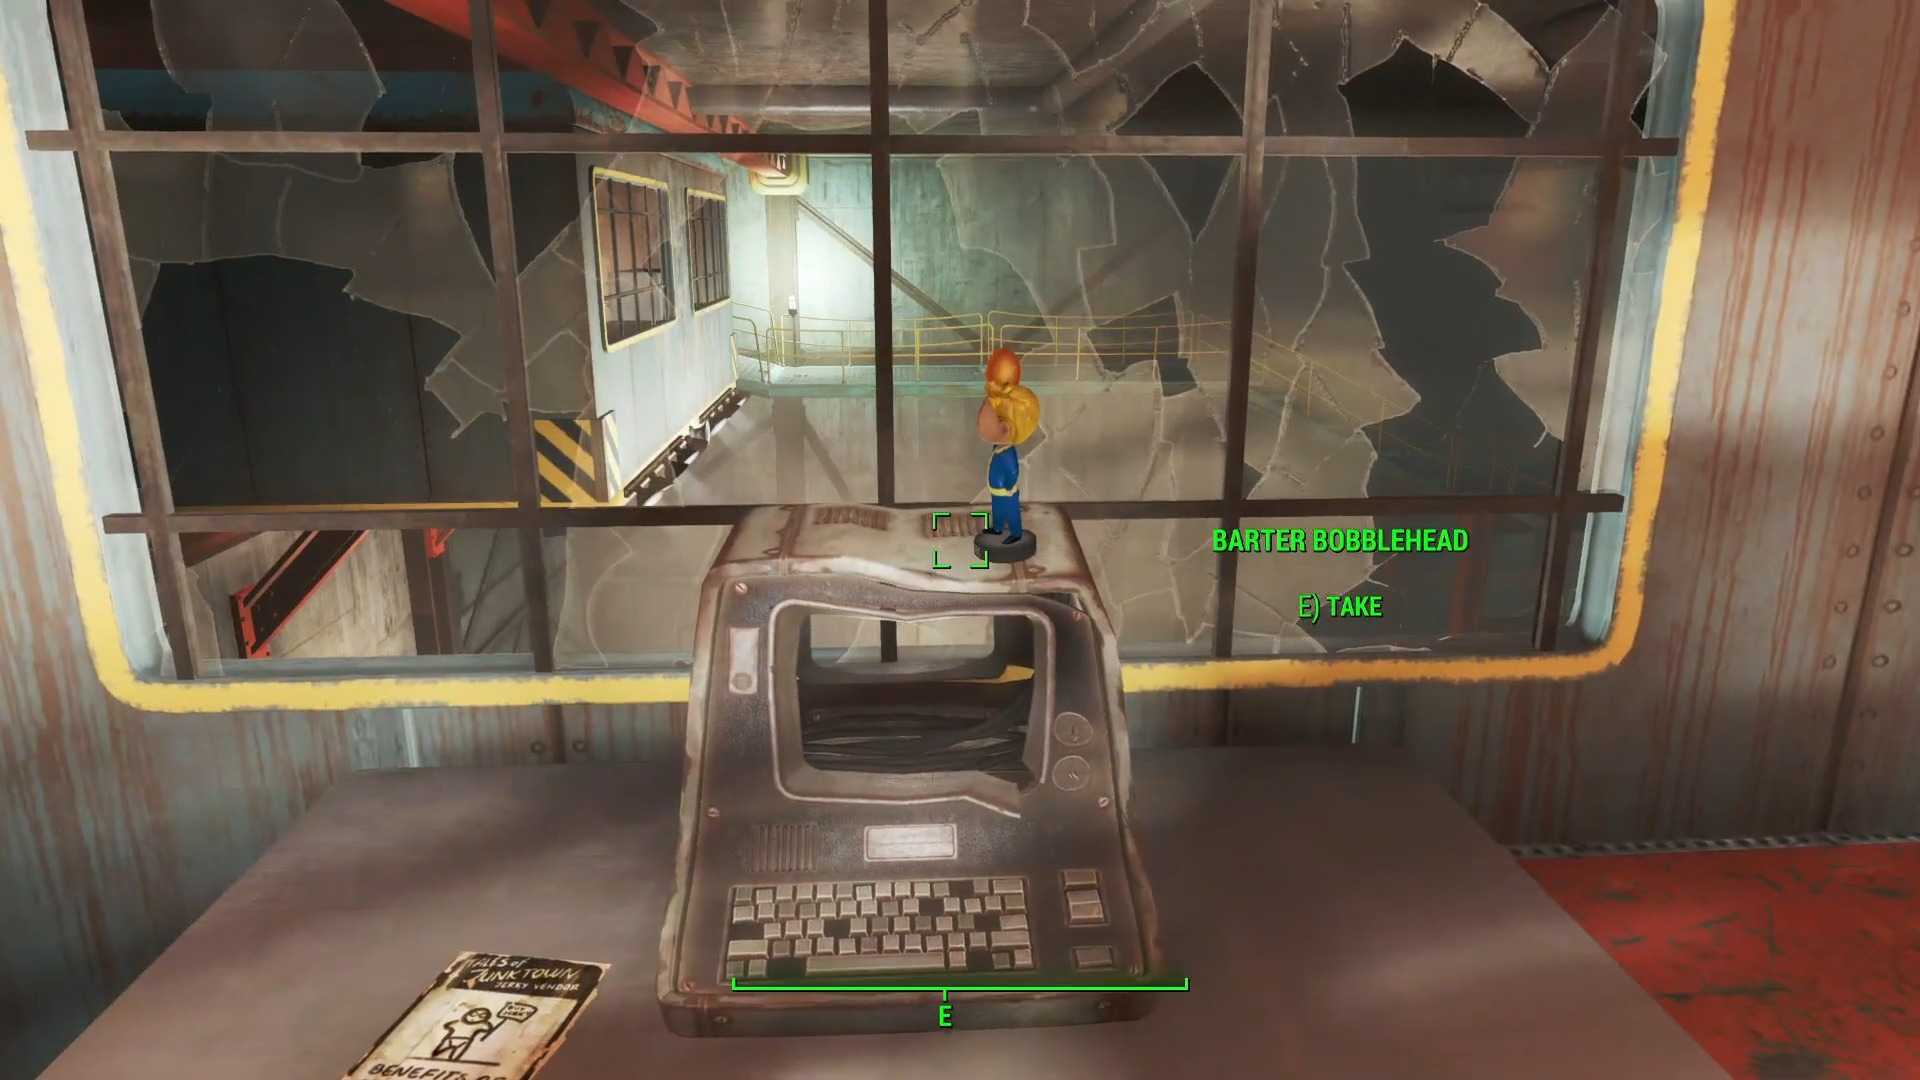 The Barter Bobblehead in Fallout 4